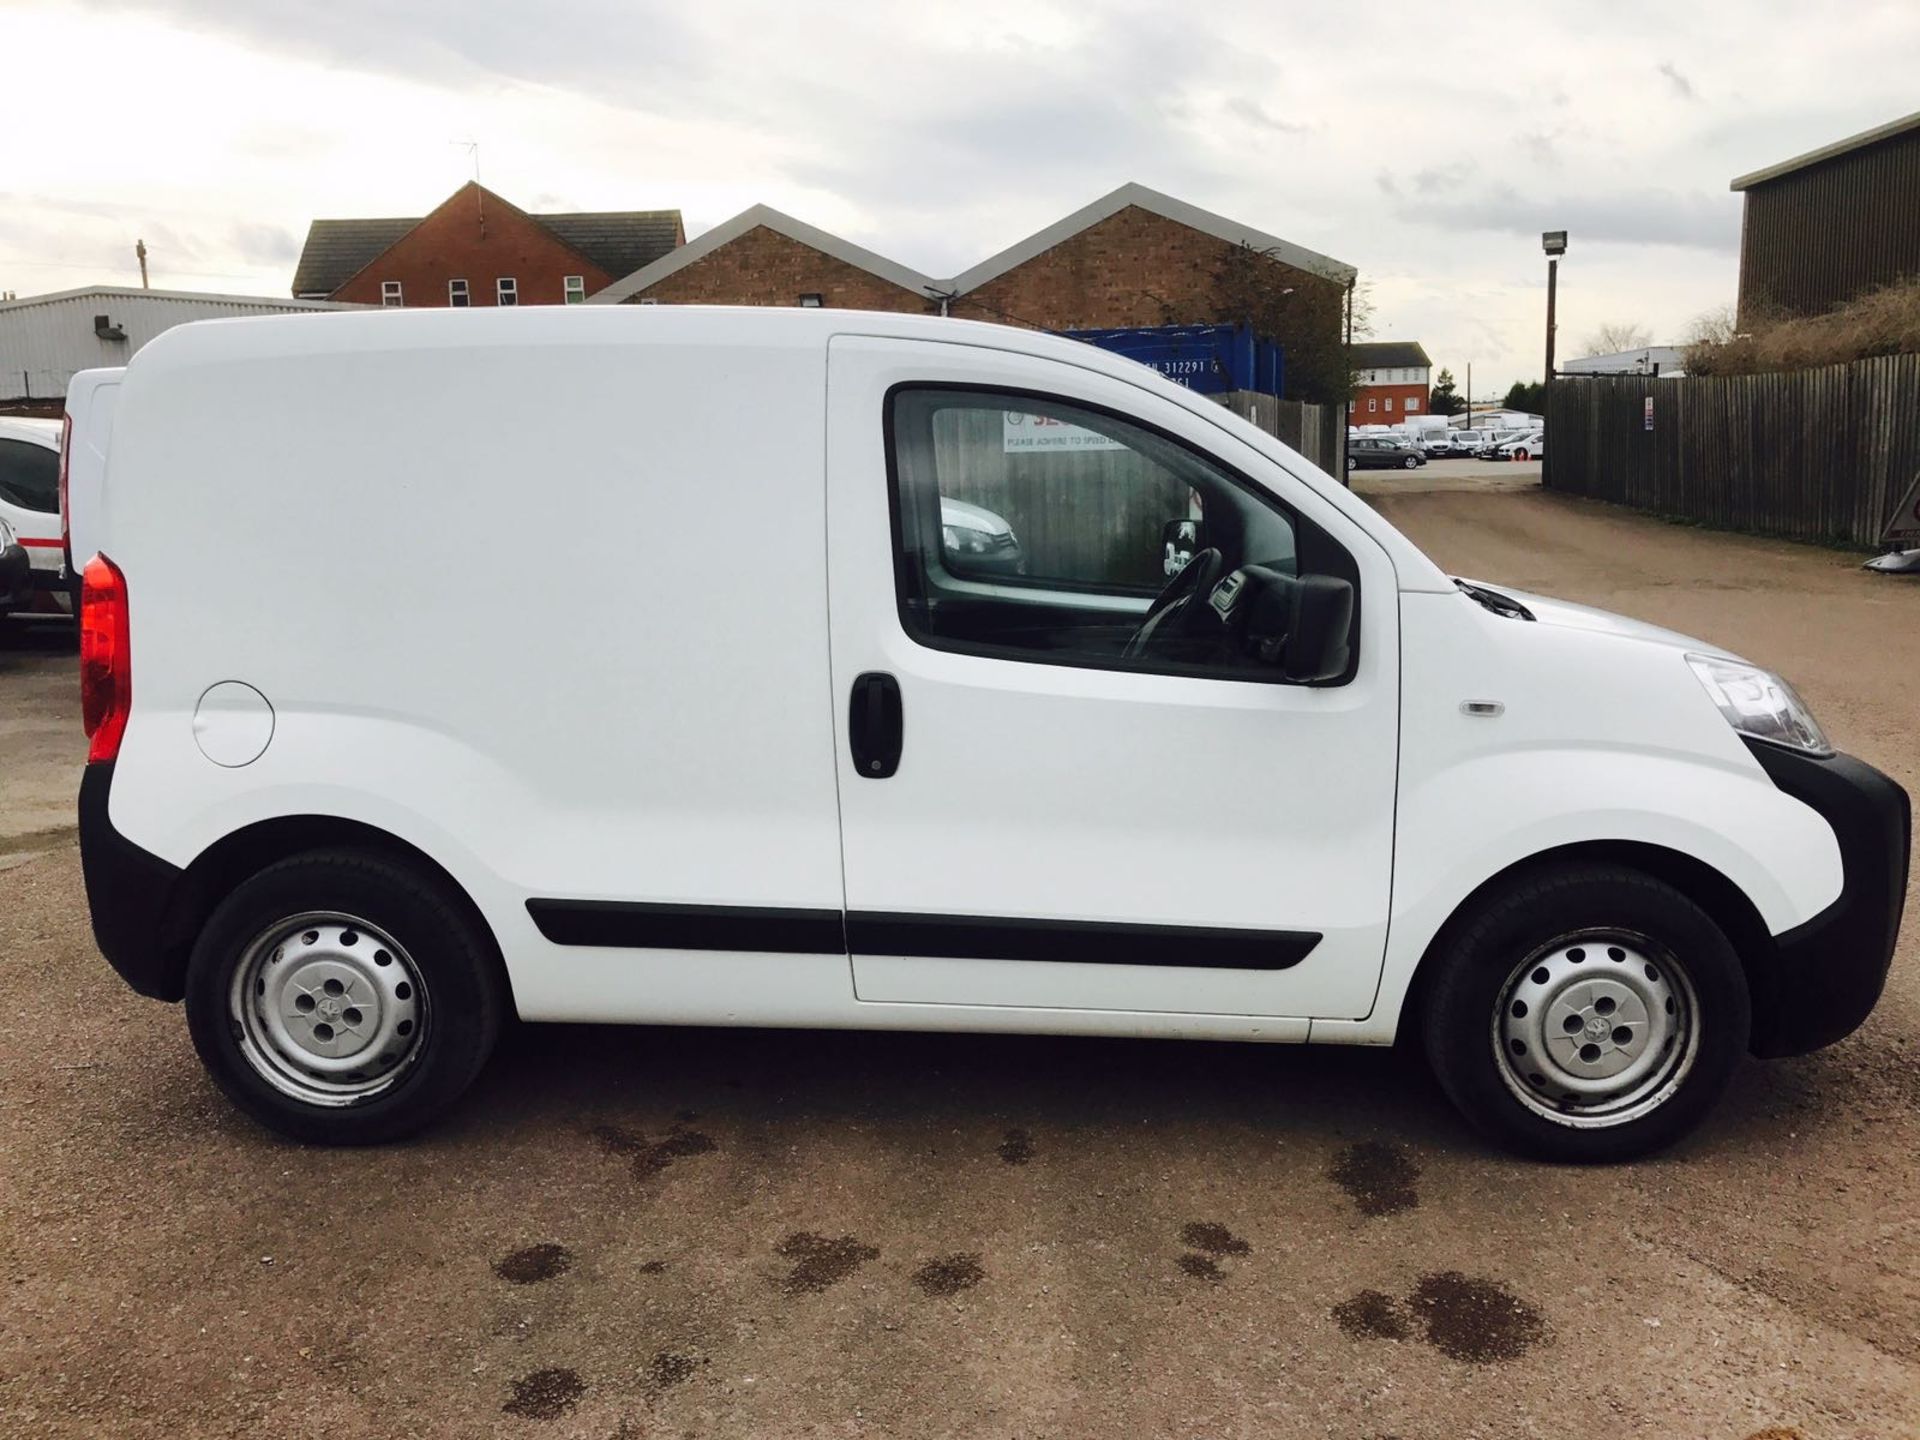 ON SALE PEUGEOT BIPPER 1.3HDI "PLUS PACK" - 2014 MODEL - 1 OWNER - AIR CON - BLUETOOTH - LOW MILES!! - Image 6 of 18